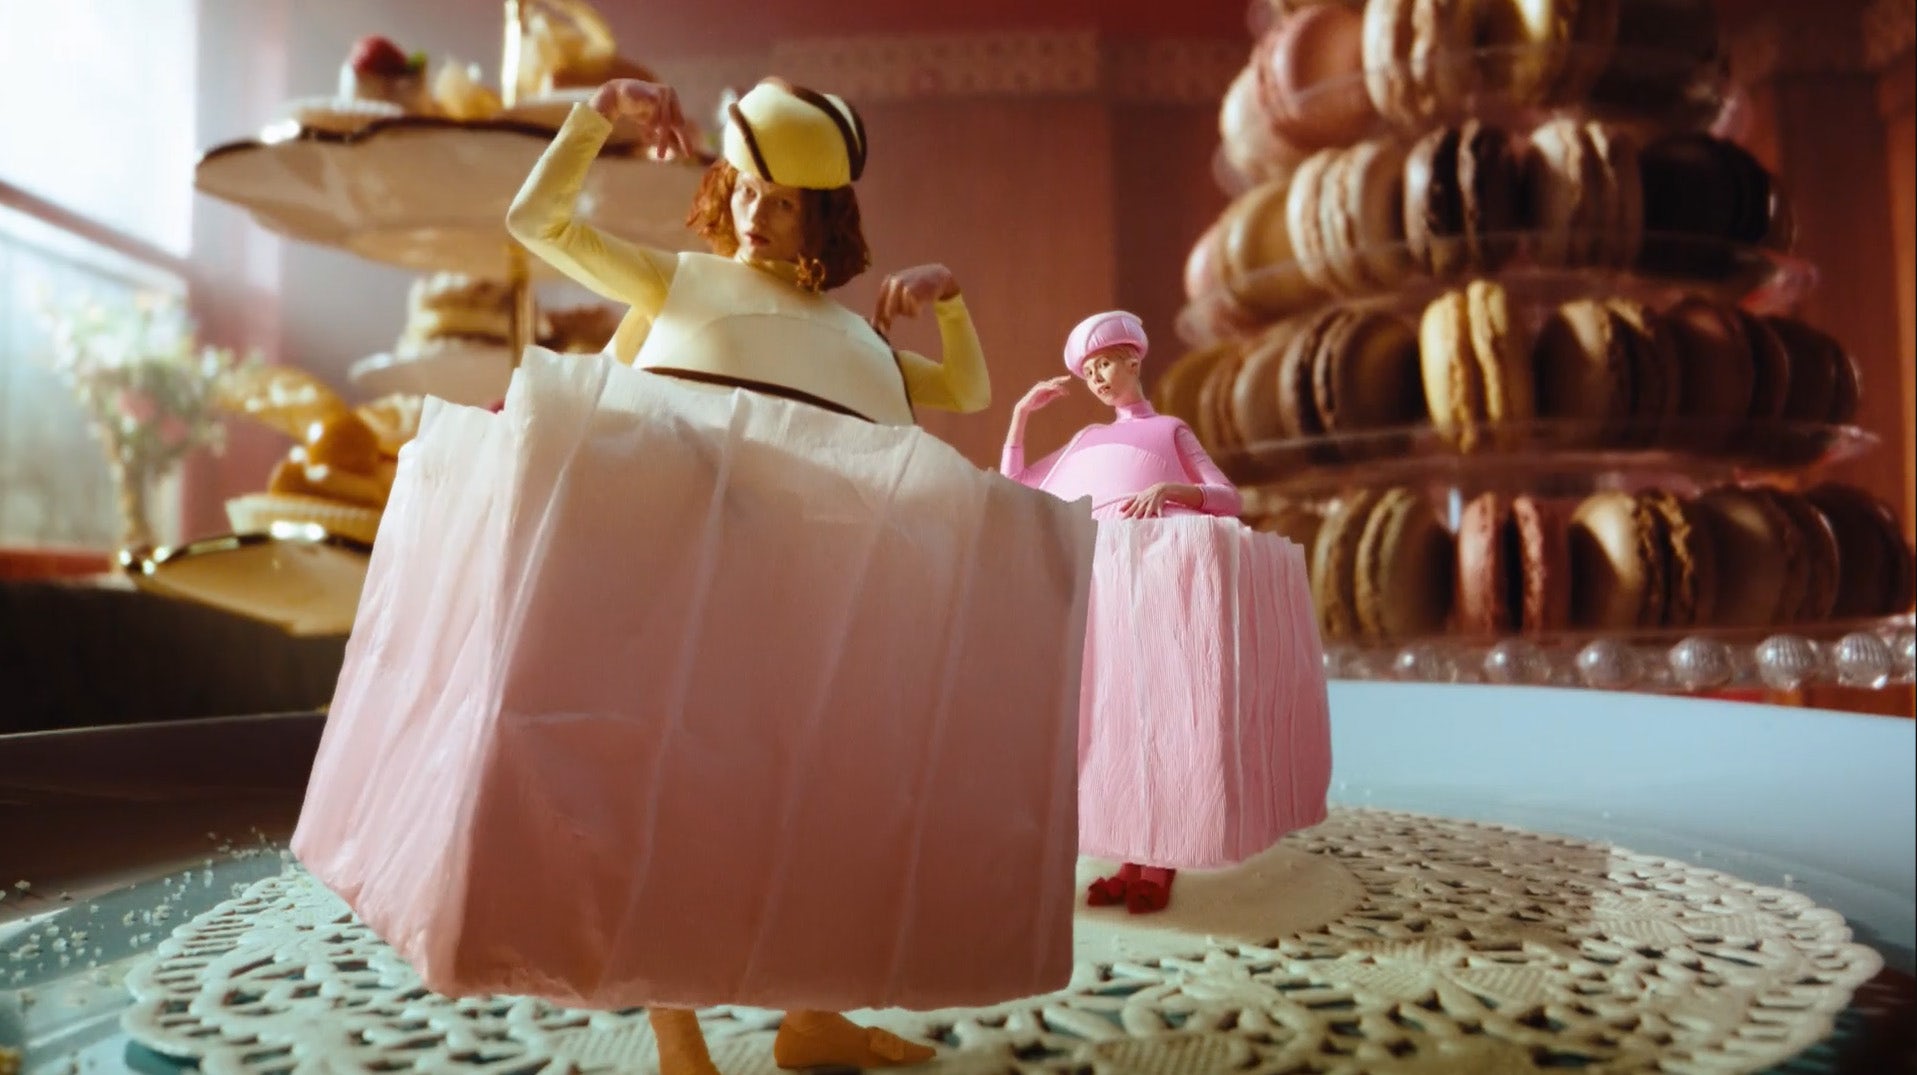 Still from the BBC Eurovision 2023 ad showing two people wearing boxy dresses in the shape of petit-fours with macarons in the background as set dressing